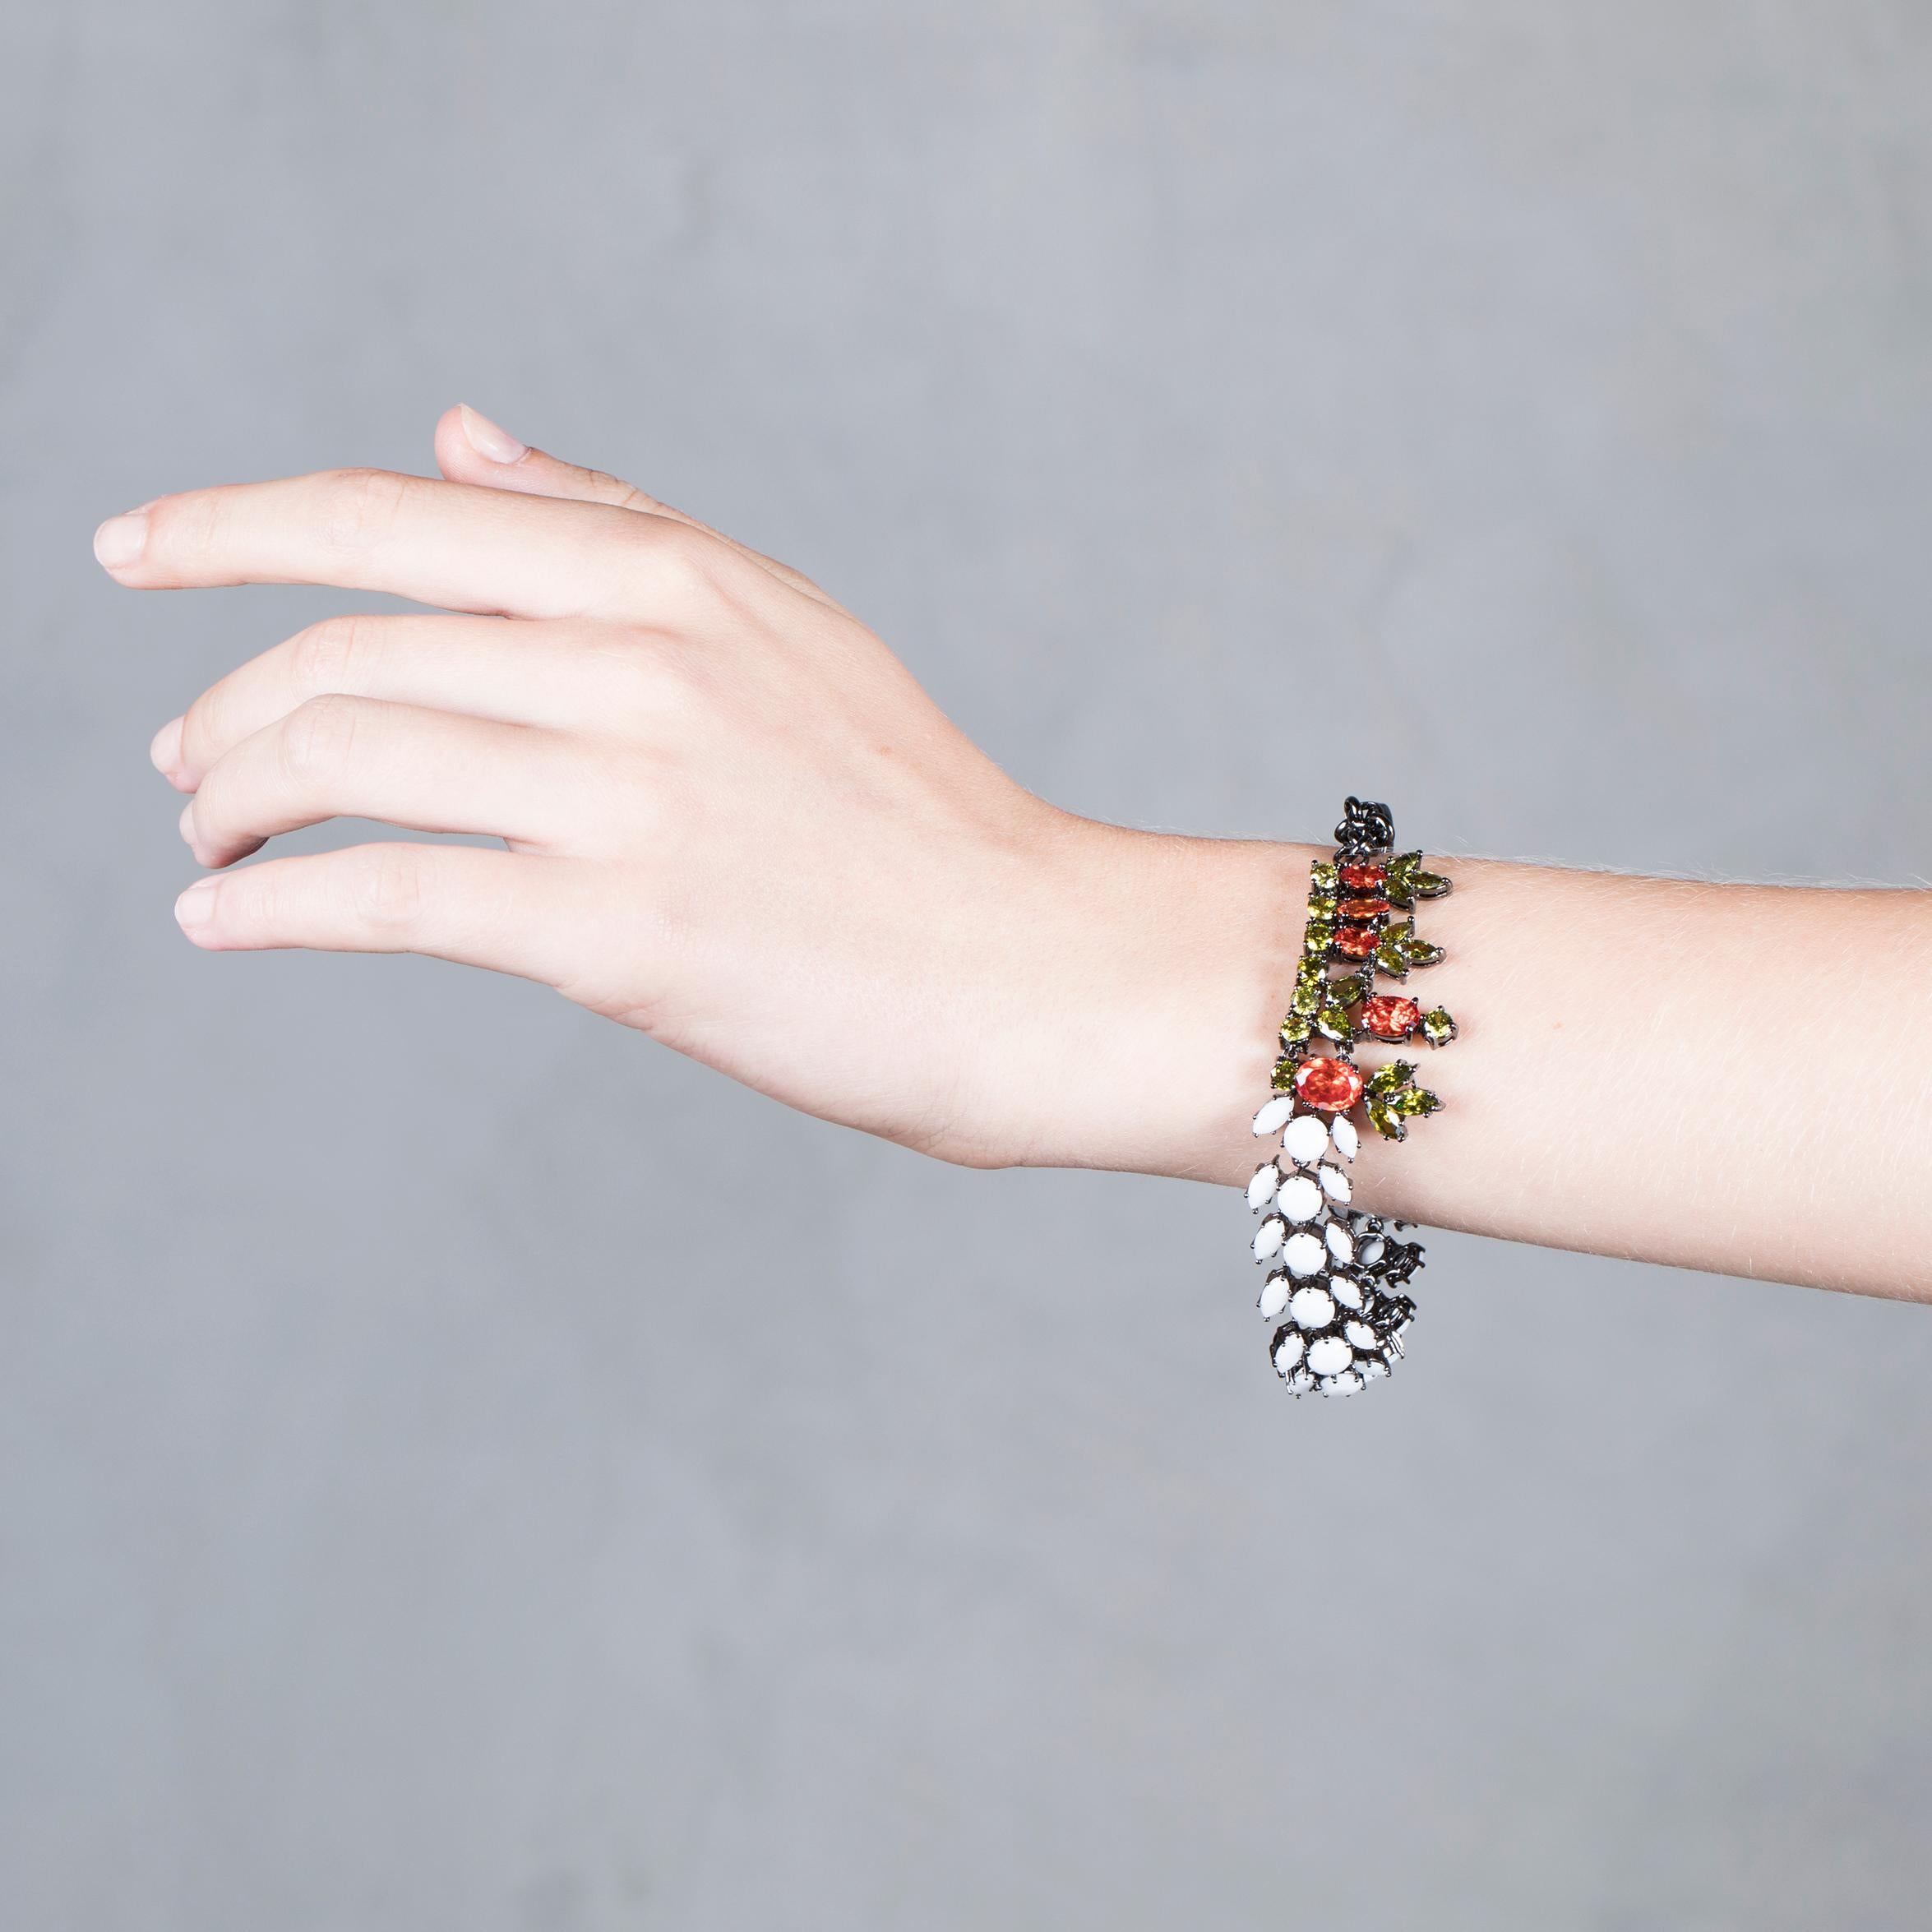 Inject a dose of color with this IOSSELLIANI CLUB AFRICANA bracelet. Following the vocation of the brand, this piece translates colors and shapes into eclectic jewels, featuring a cascade of white glass stones mixed with a sodalite cabochon and a